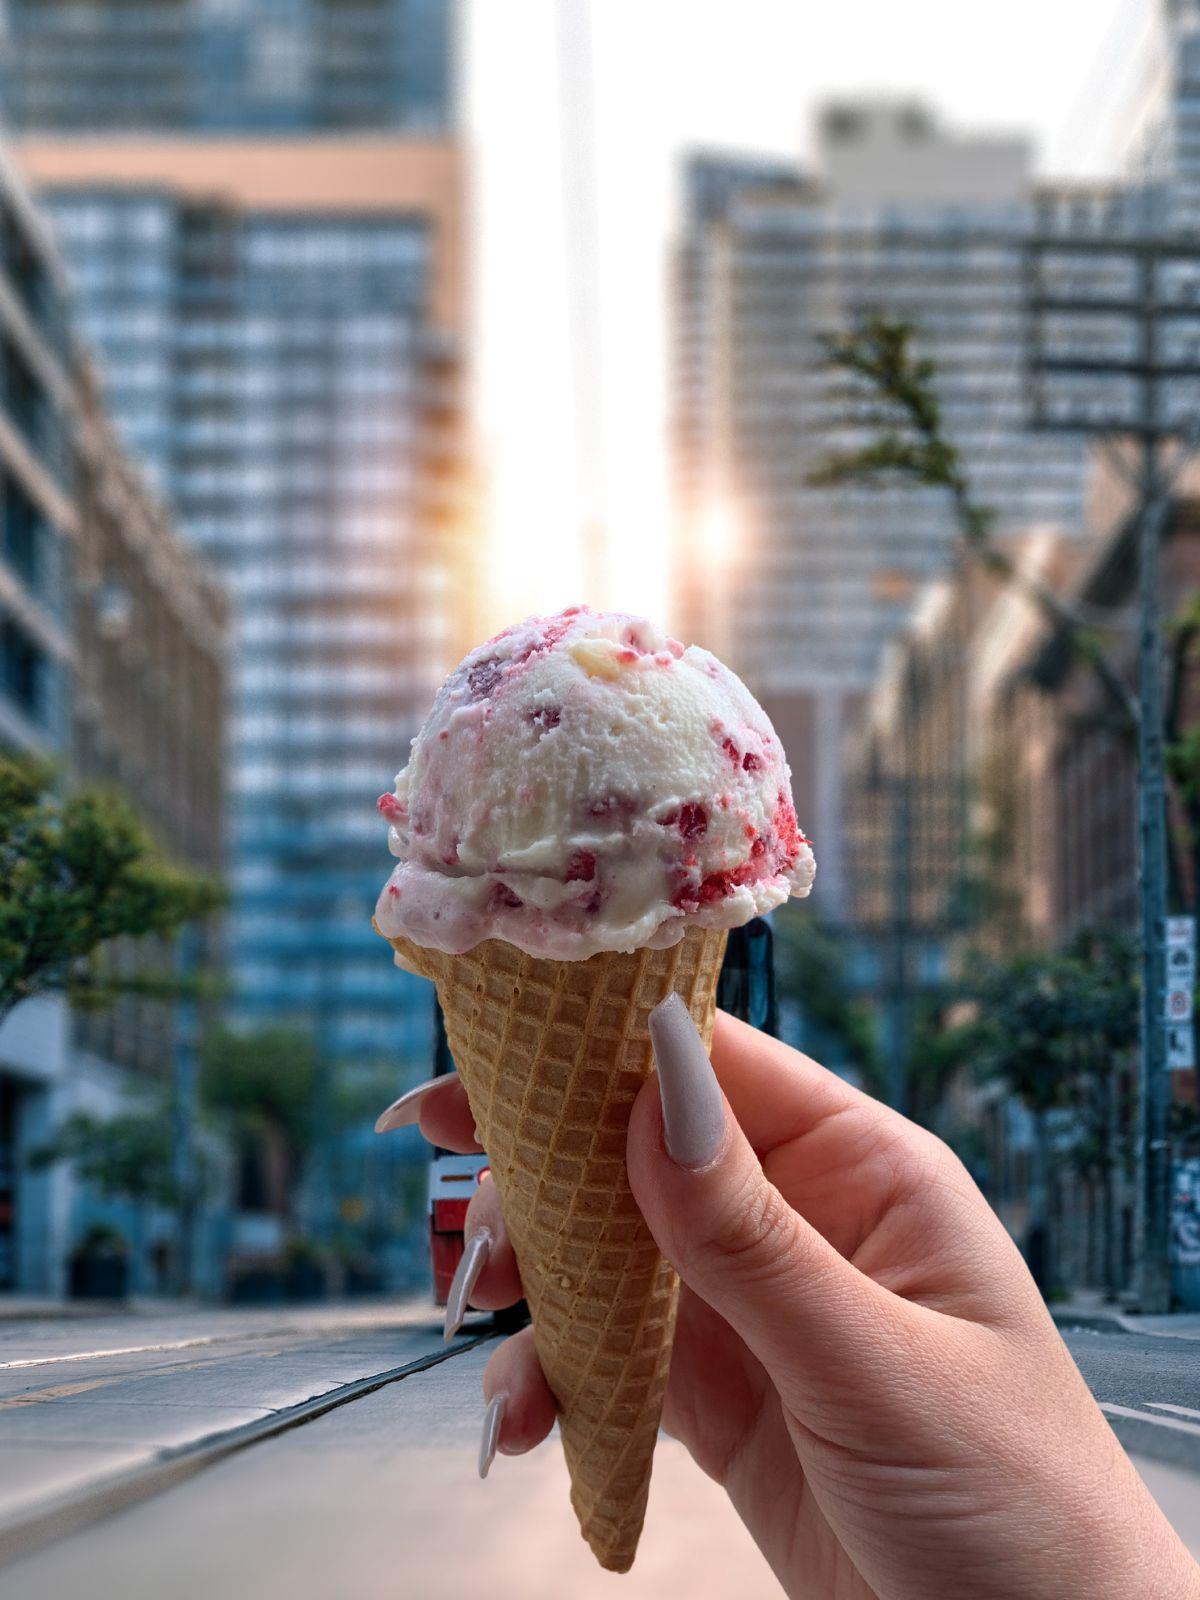 White Chocolate Ice Cream in a sugar cone background of downtown Toronto